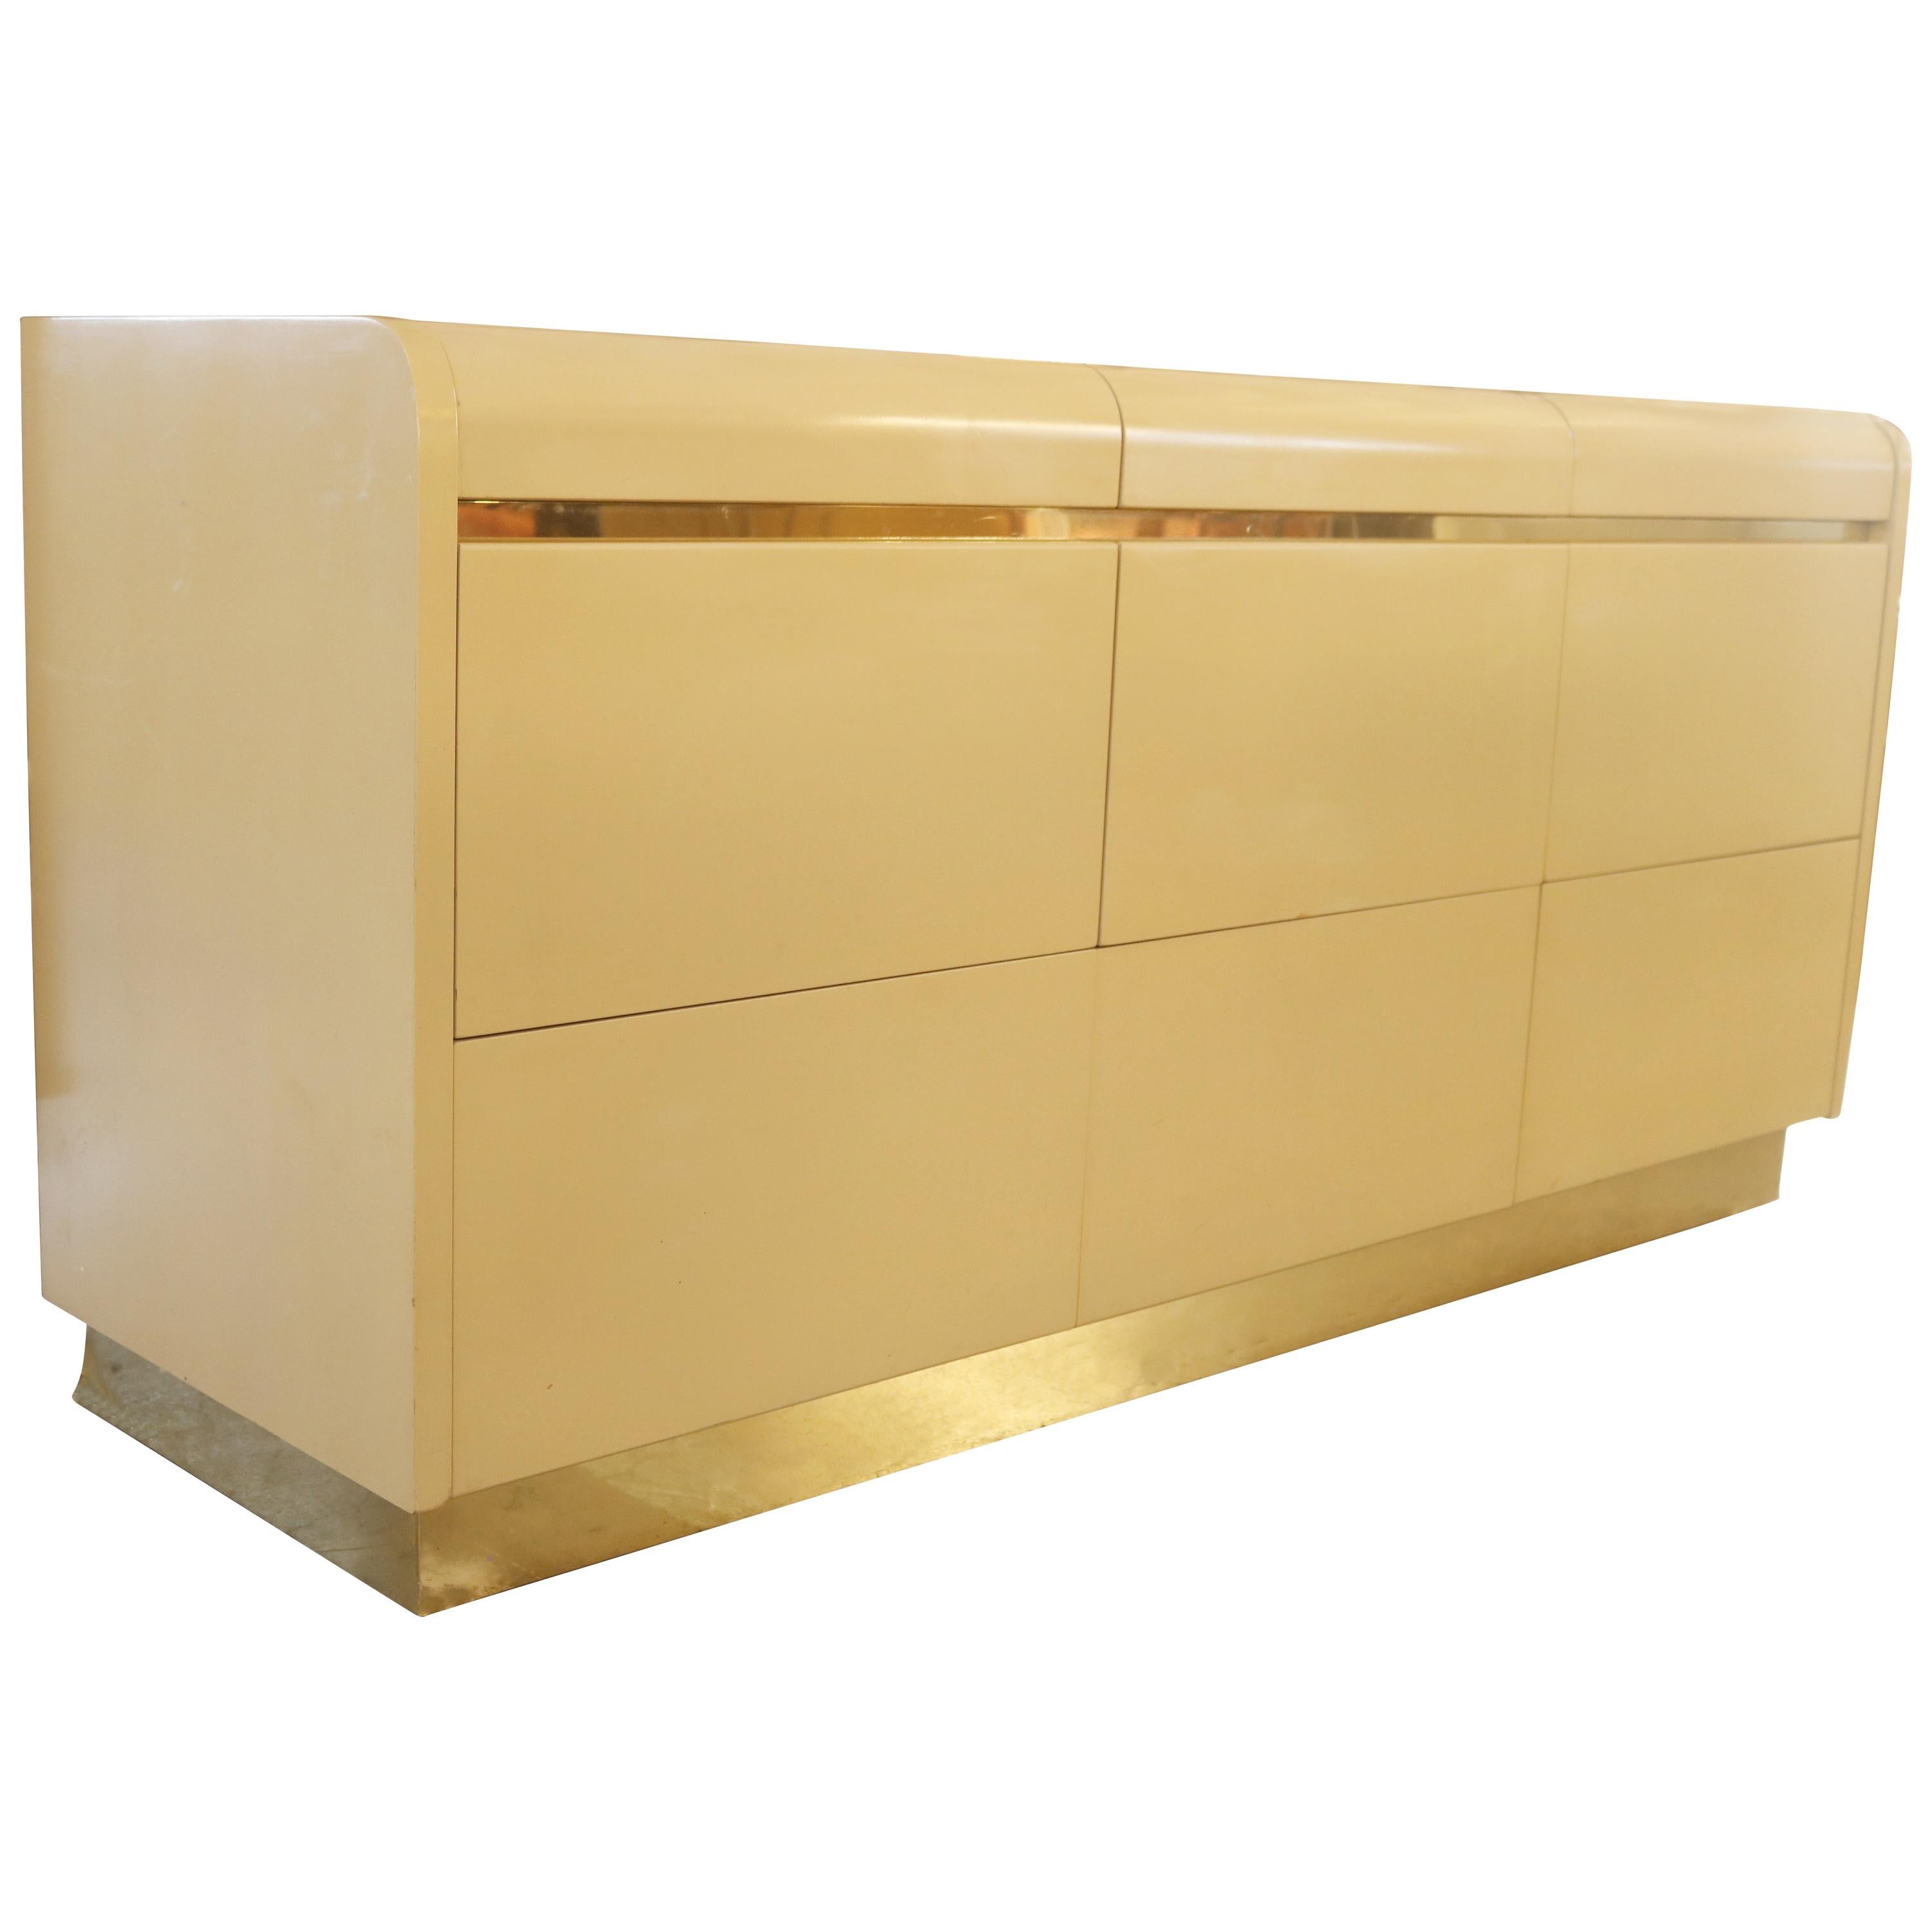 1970s Cream Lacquer and Brass Dresser by Lane